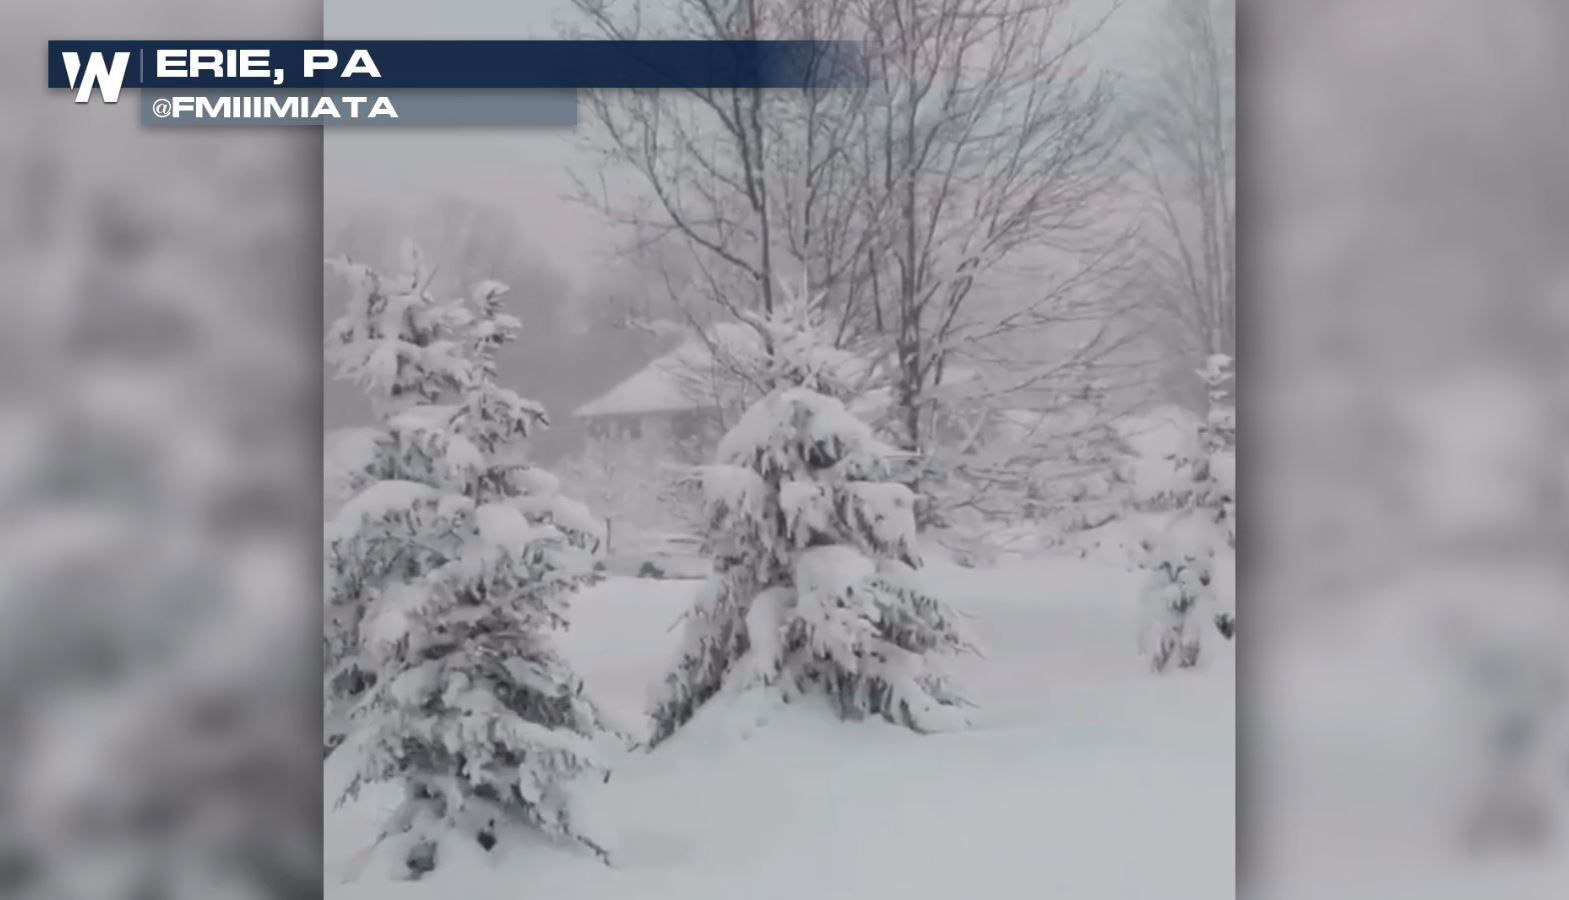 Erie, PA on pace for snowiest season